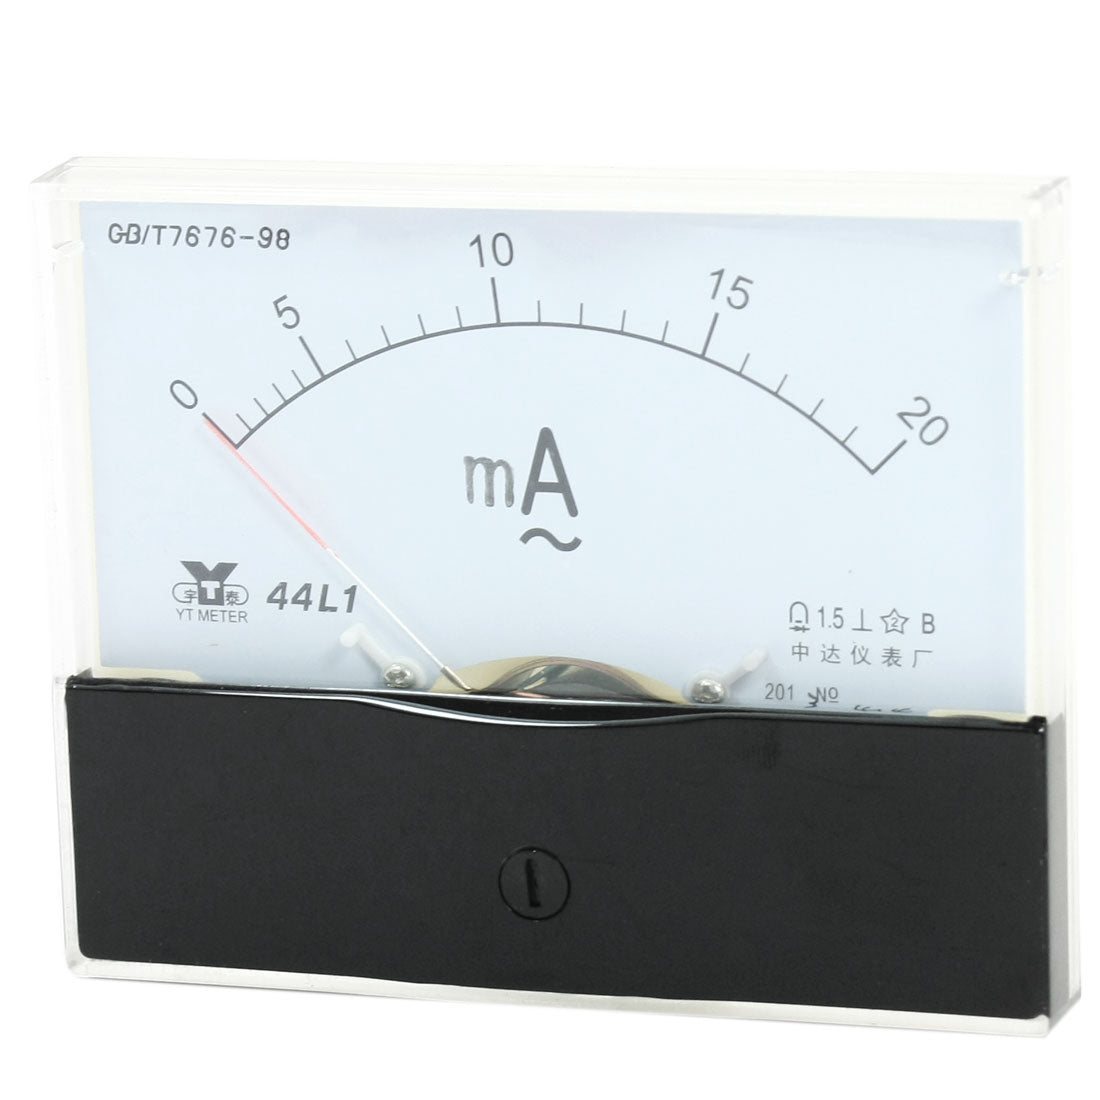 uxcell Uxcell Rectangle Measurement Tool Analog Panel Ammeter Gauge AC 0 - 20mA Measuring Range 44L1